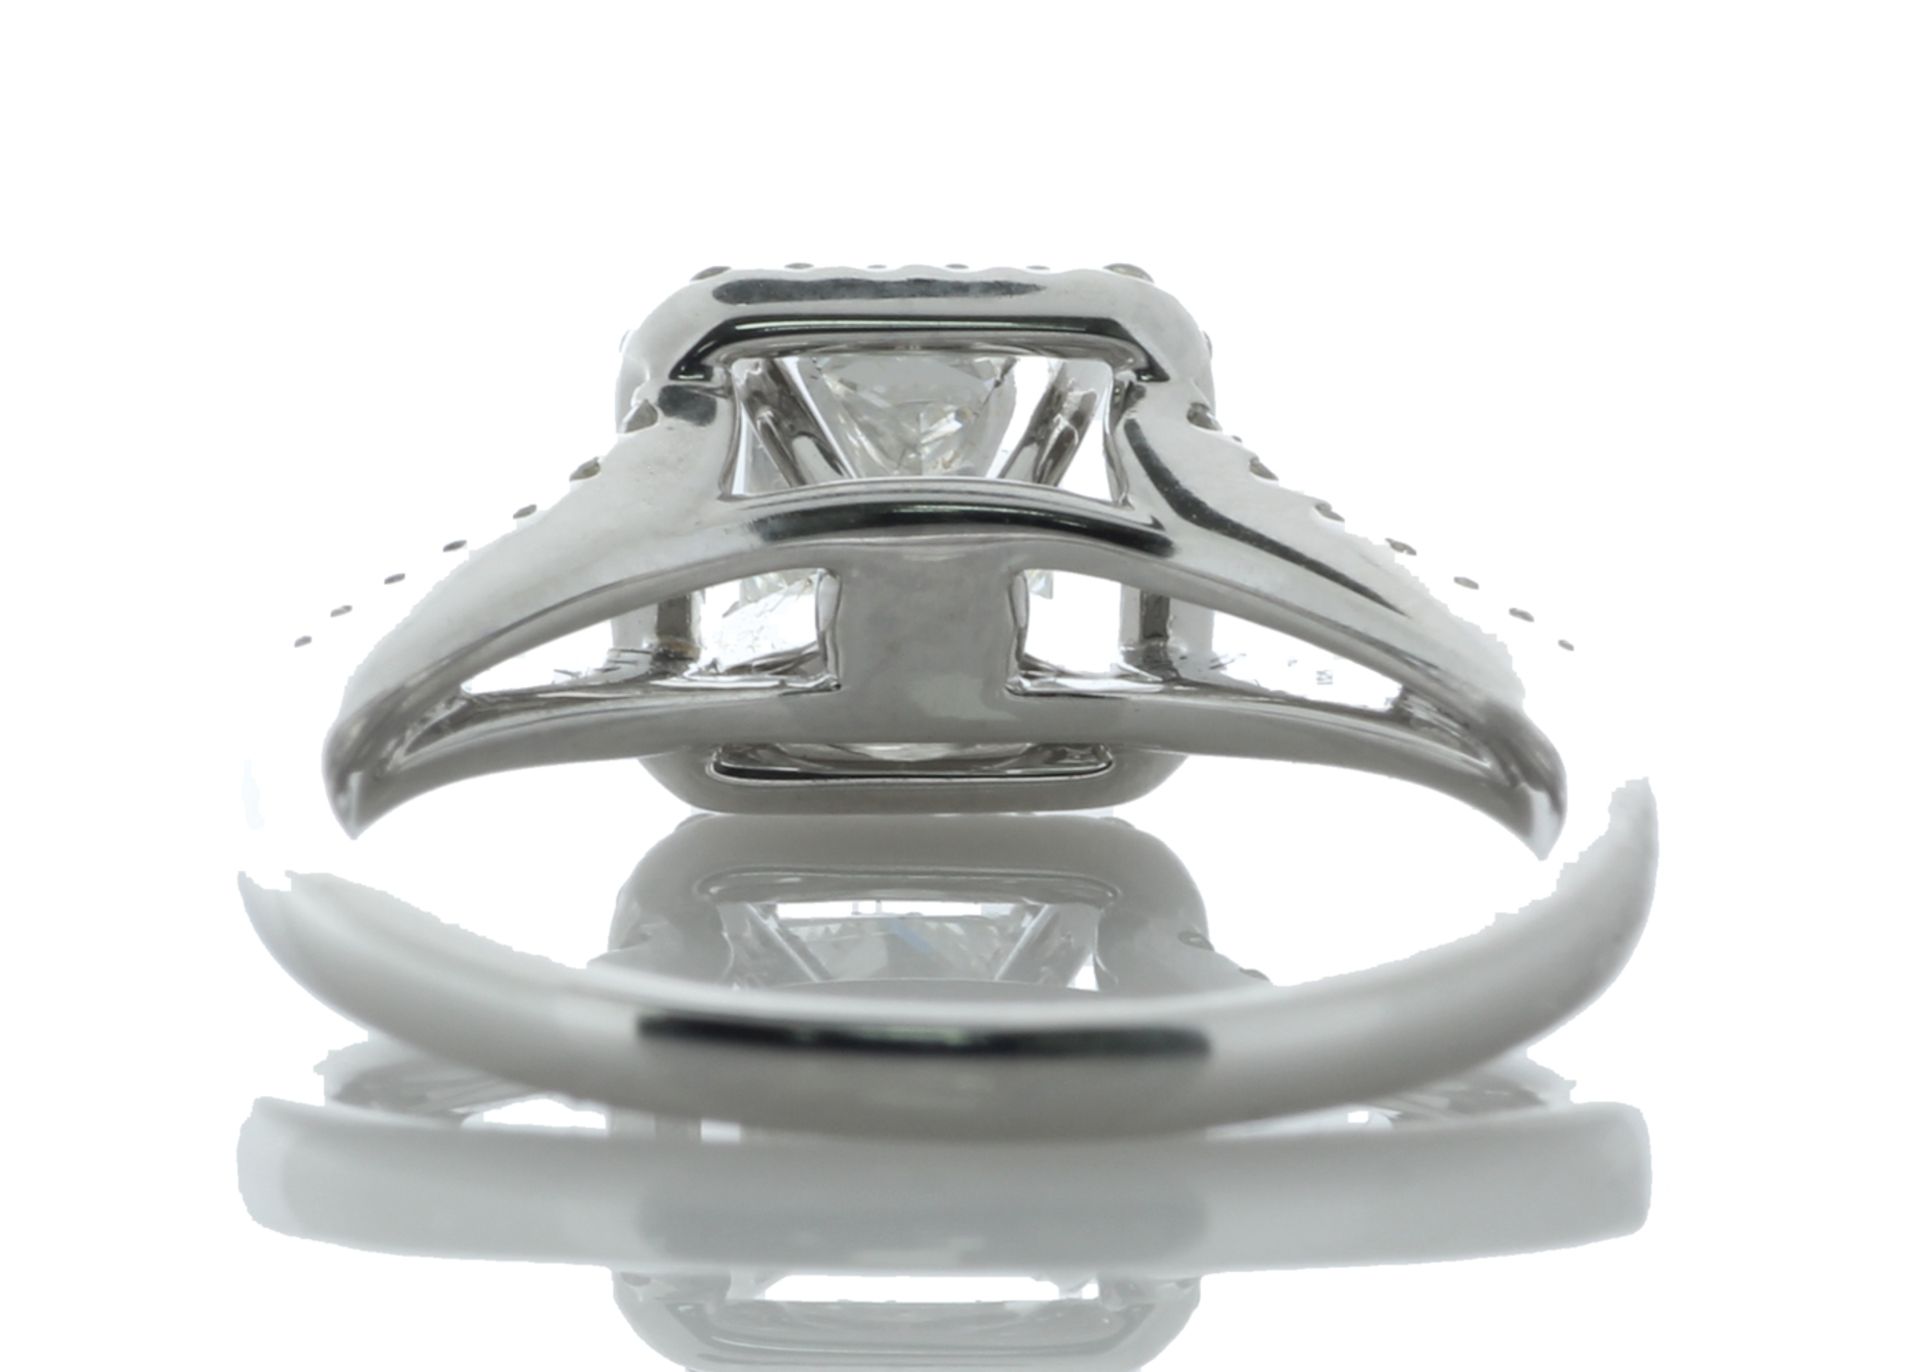 18ct White Gold Single Stone Princess Cut Diamond Ring (0.72) 1.05 Carats - Valued by GIE £15,497.00 - Image 3 of 5